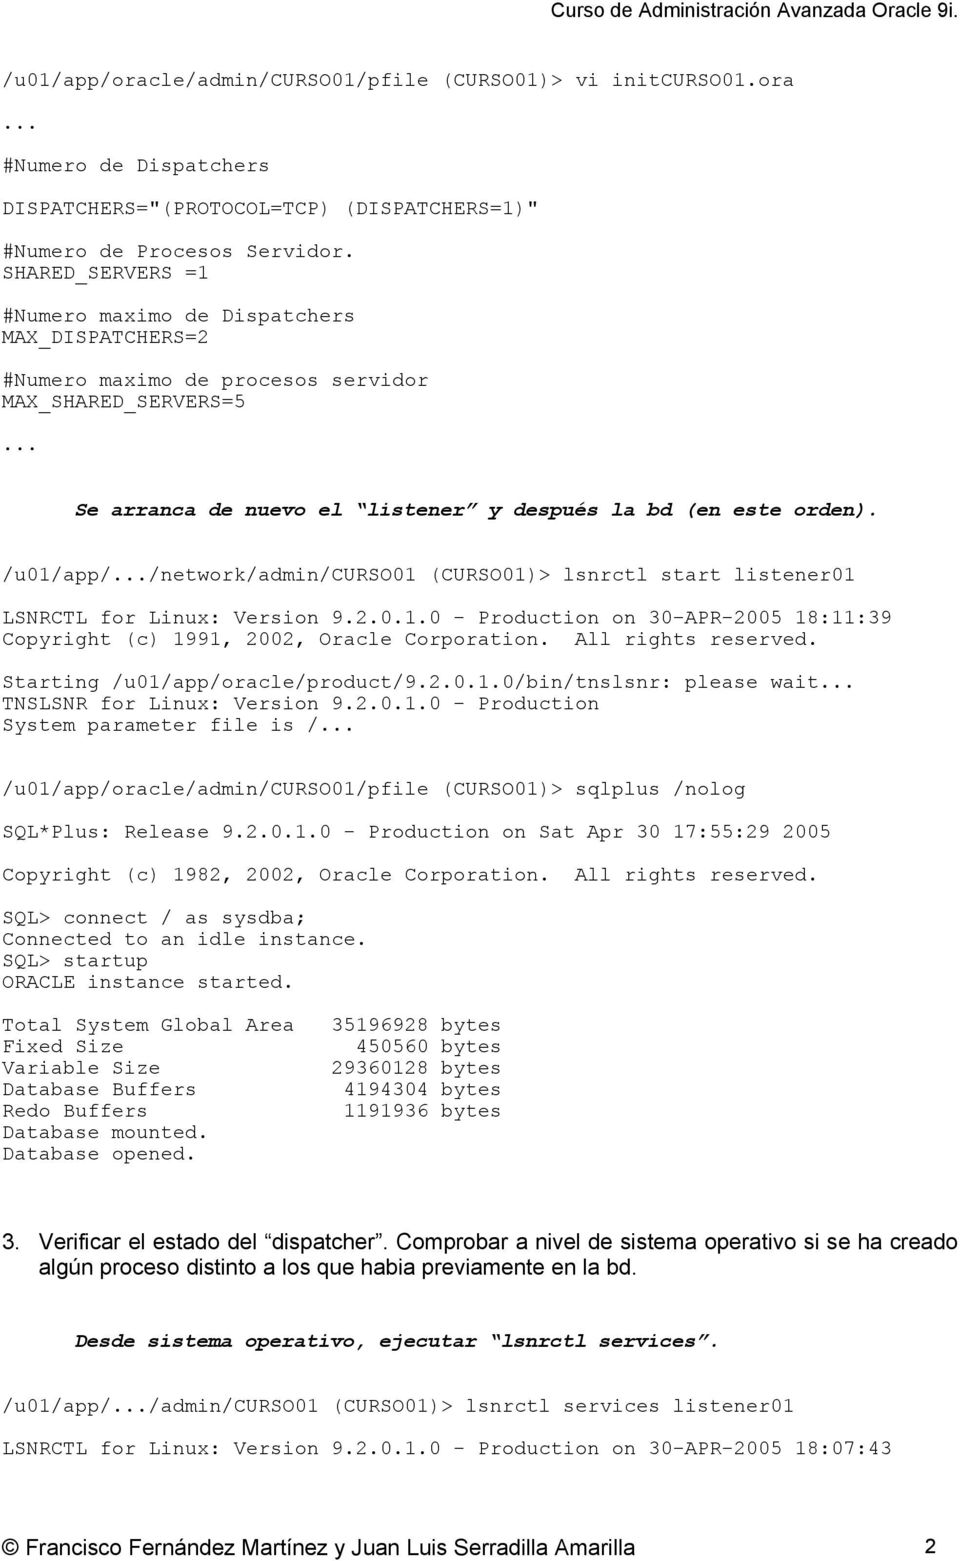 /u01/app/.../network/admin/curso01 (CURSO01)> lsnrctl start listener01 LSNRCTL for Linux: Version 9.2.0.1.0 - Production on 30-APR-2005 18:11:39 Copyright (c) 1991, 2002, Oracle Corporation.